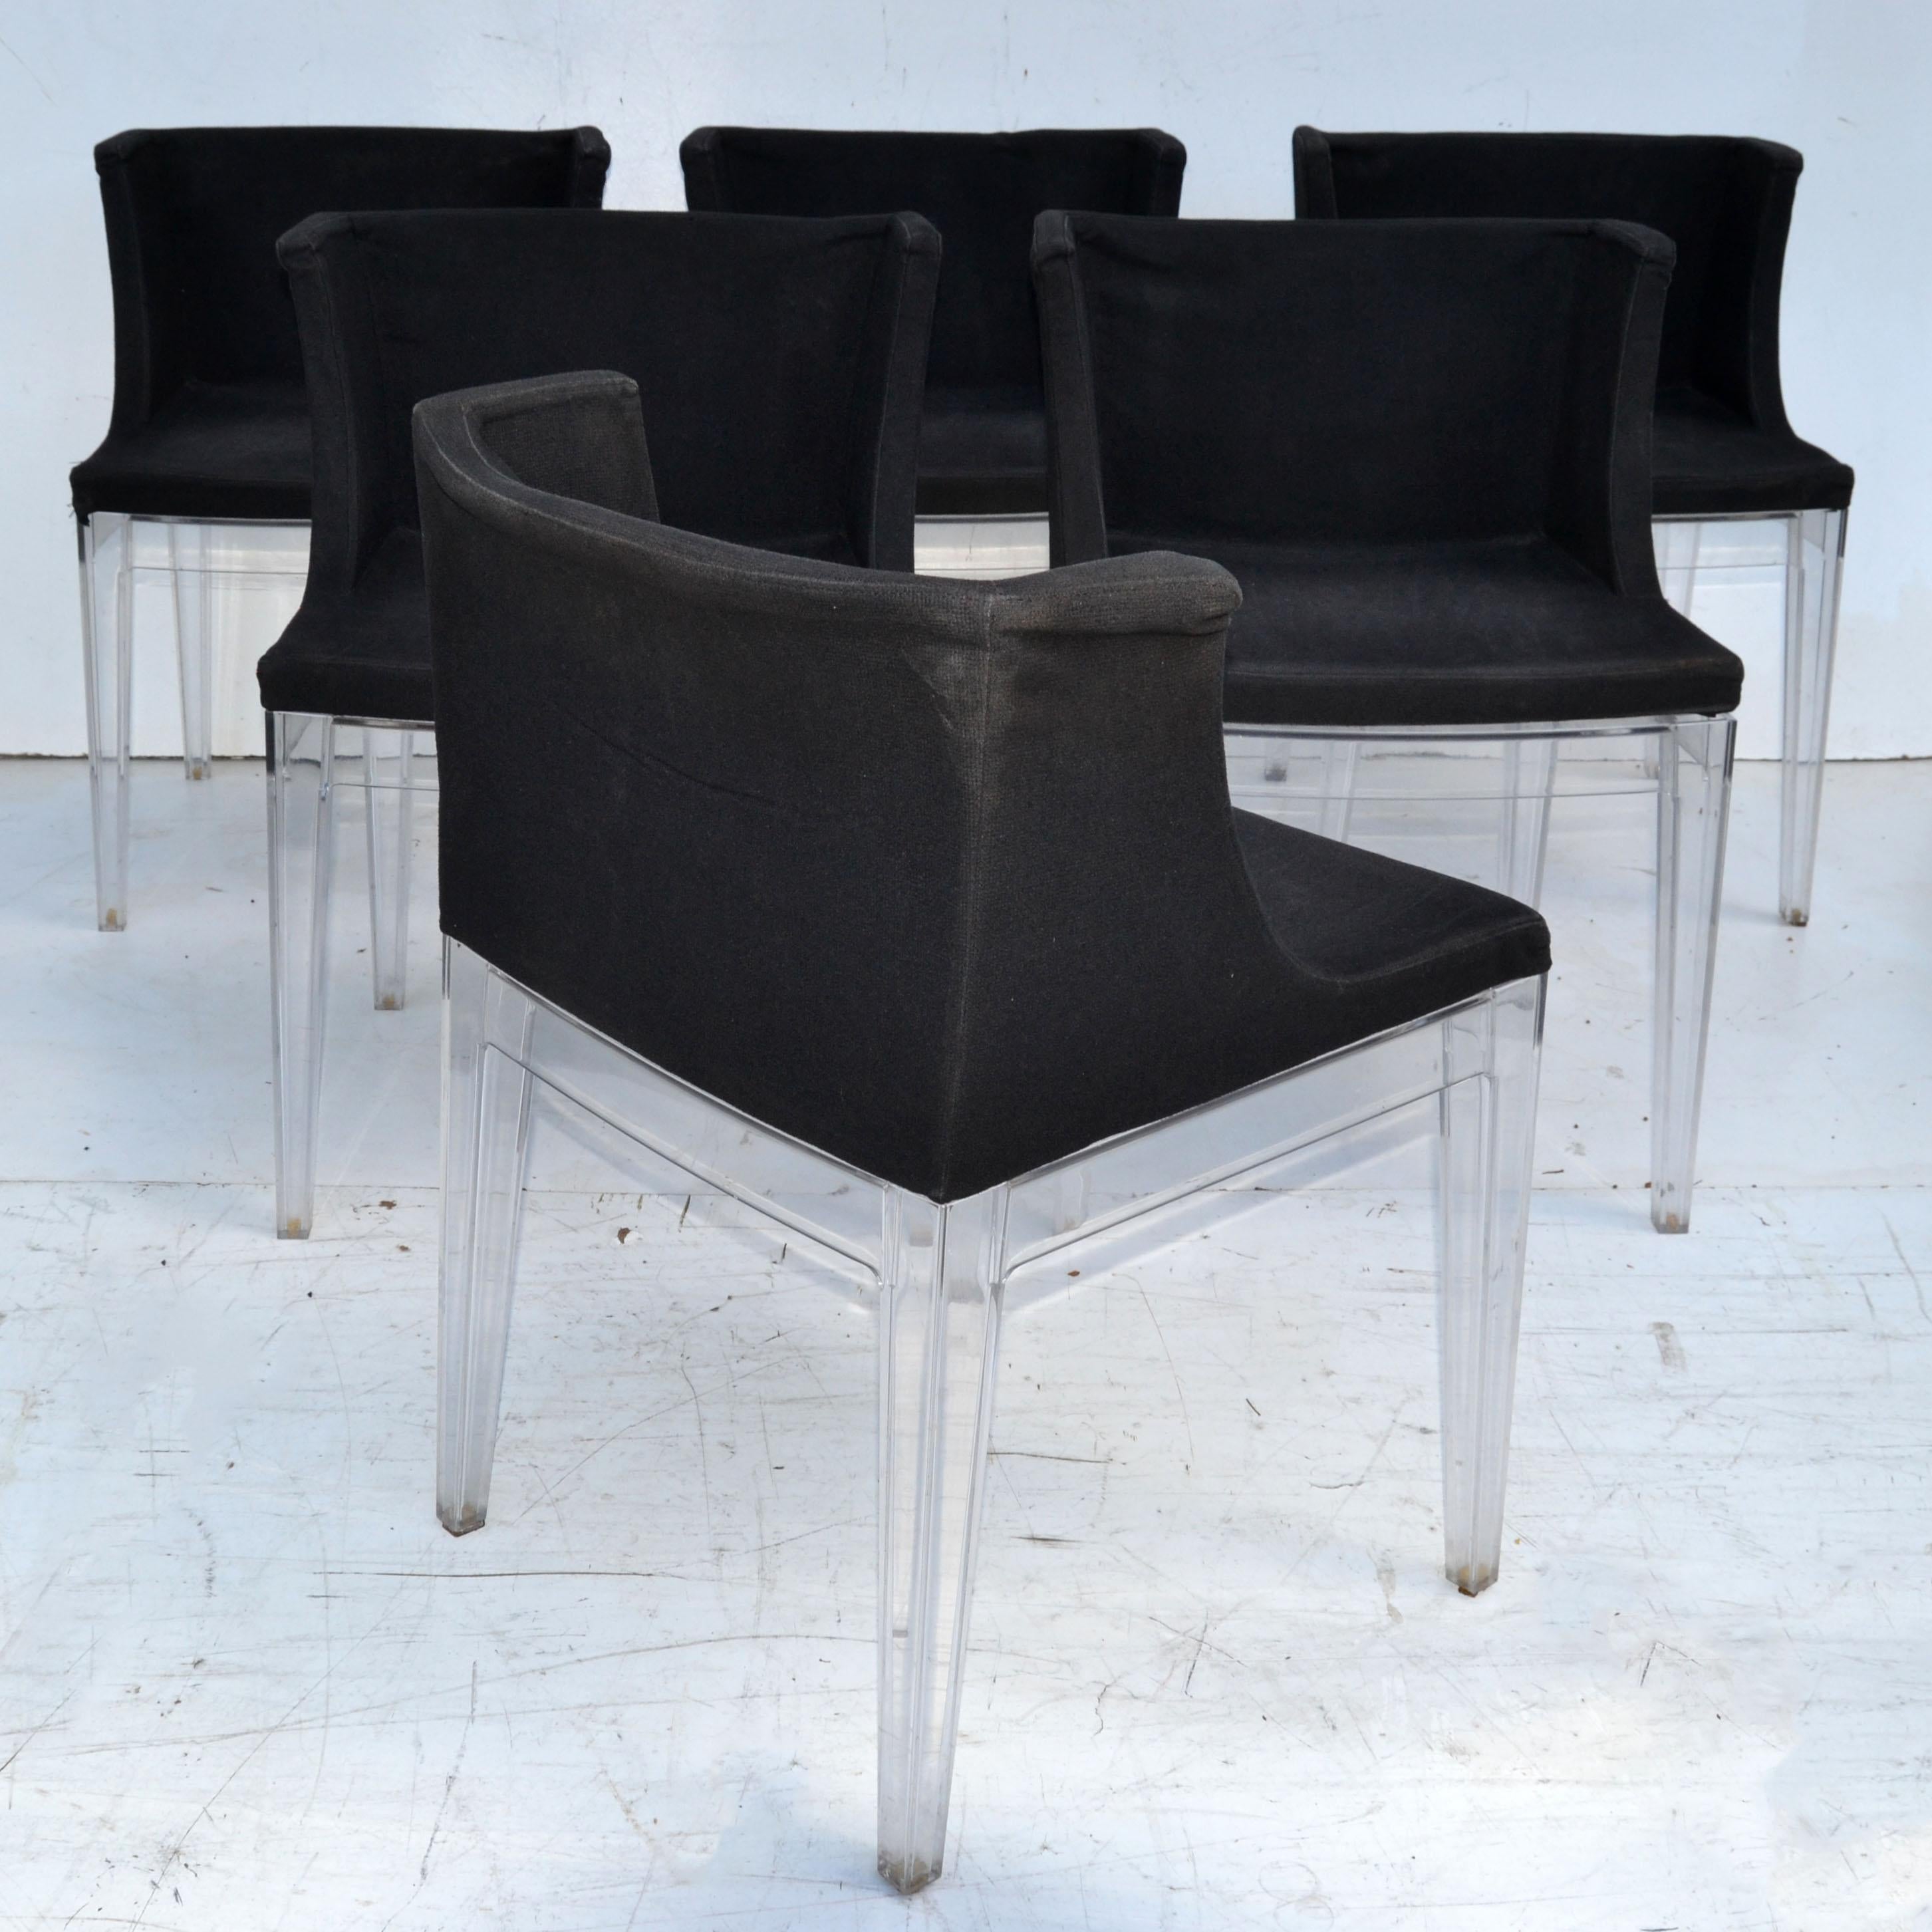 6 Kartell Italy Mademoiselle Chairs by Philippe Starck Black Fabric Lucite For Sale 1